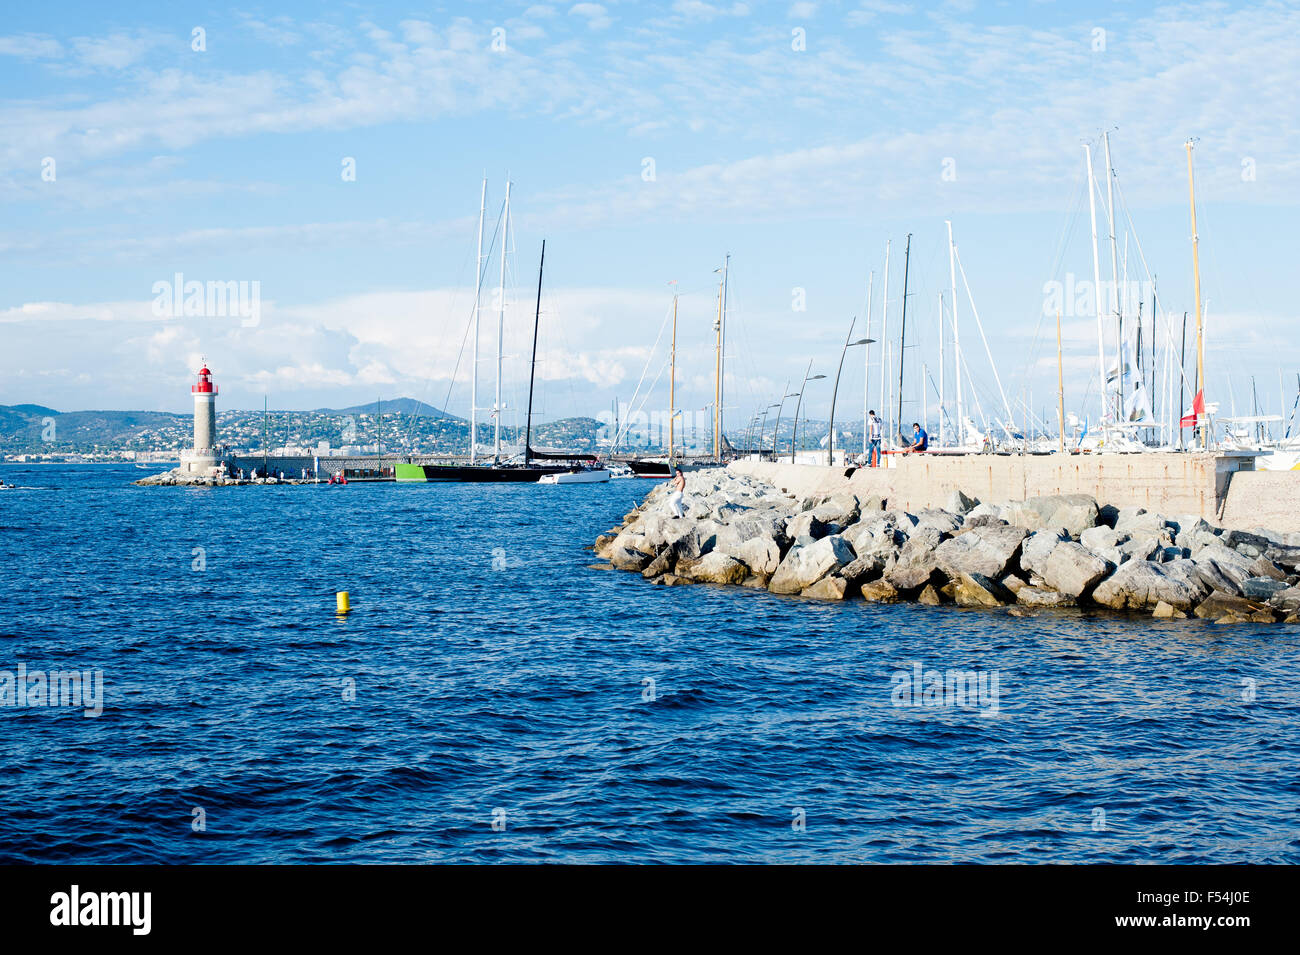 Saint Tropez, France - September 26, 2015,Port and lighthouse in St Tropez 2015, French Riviera, France Stock Photo